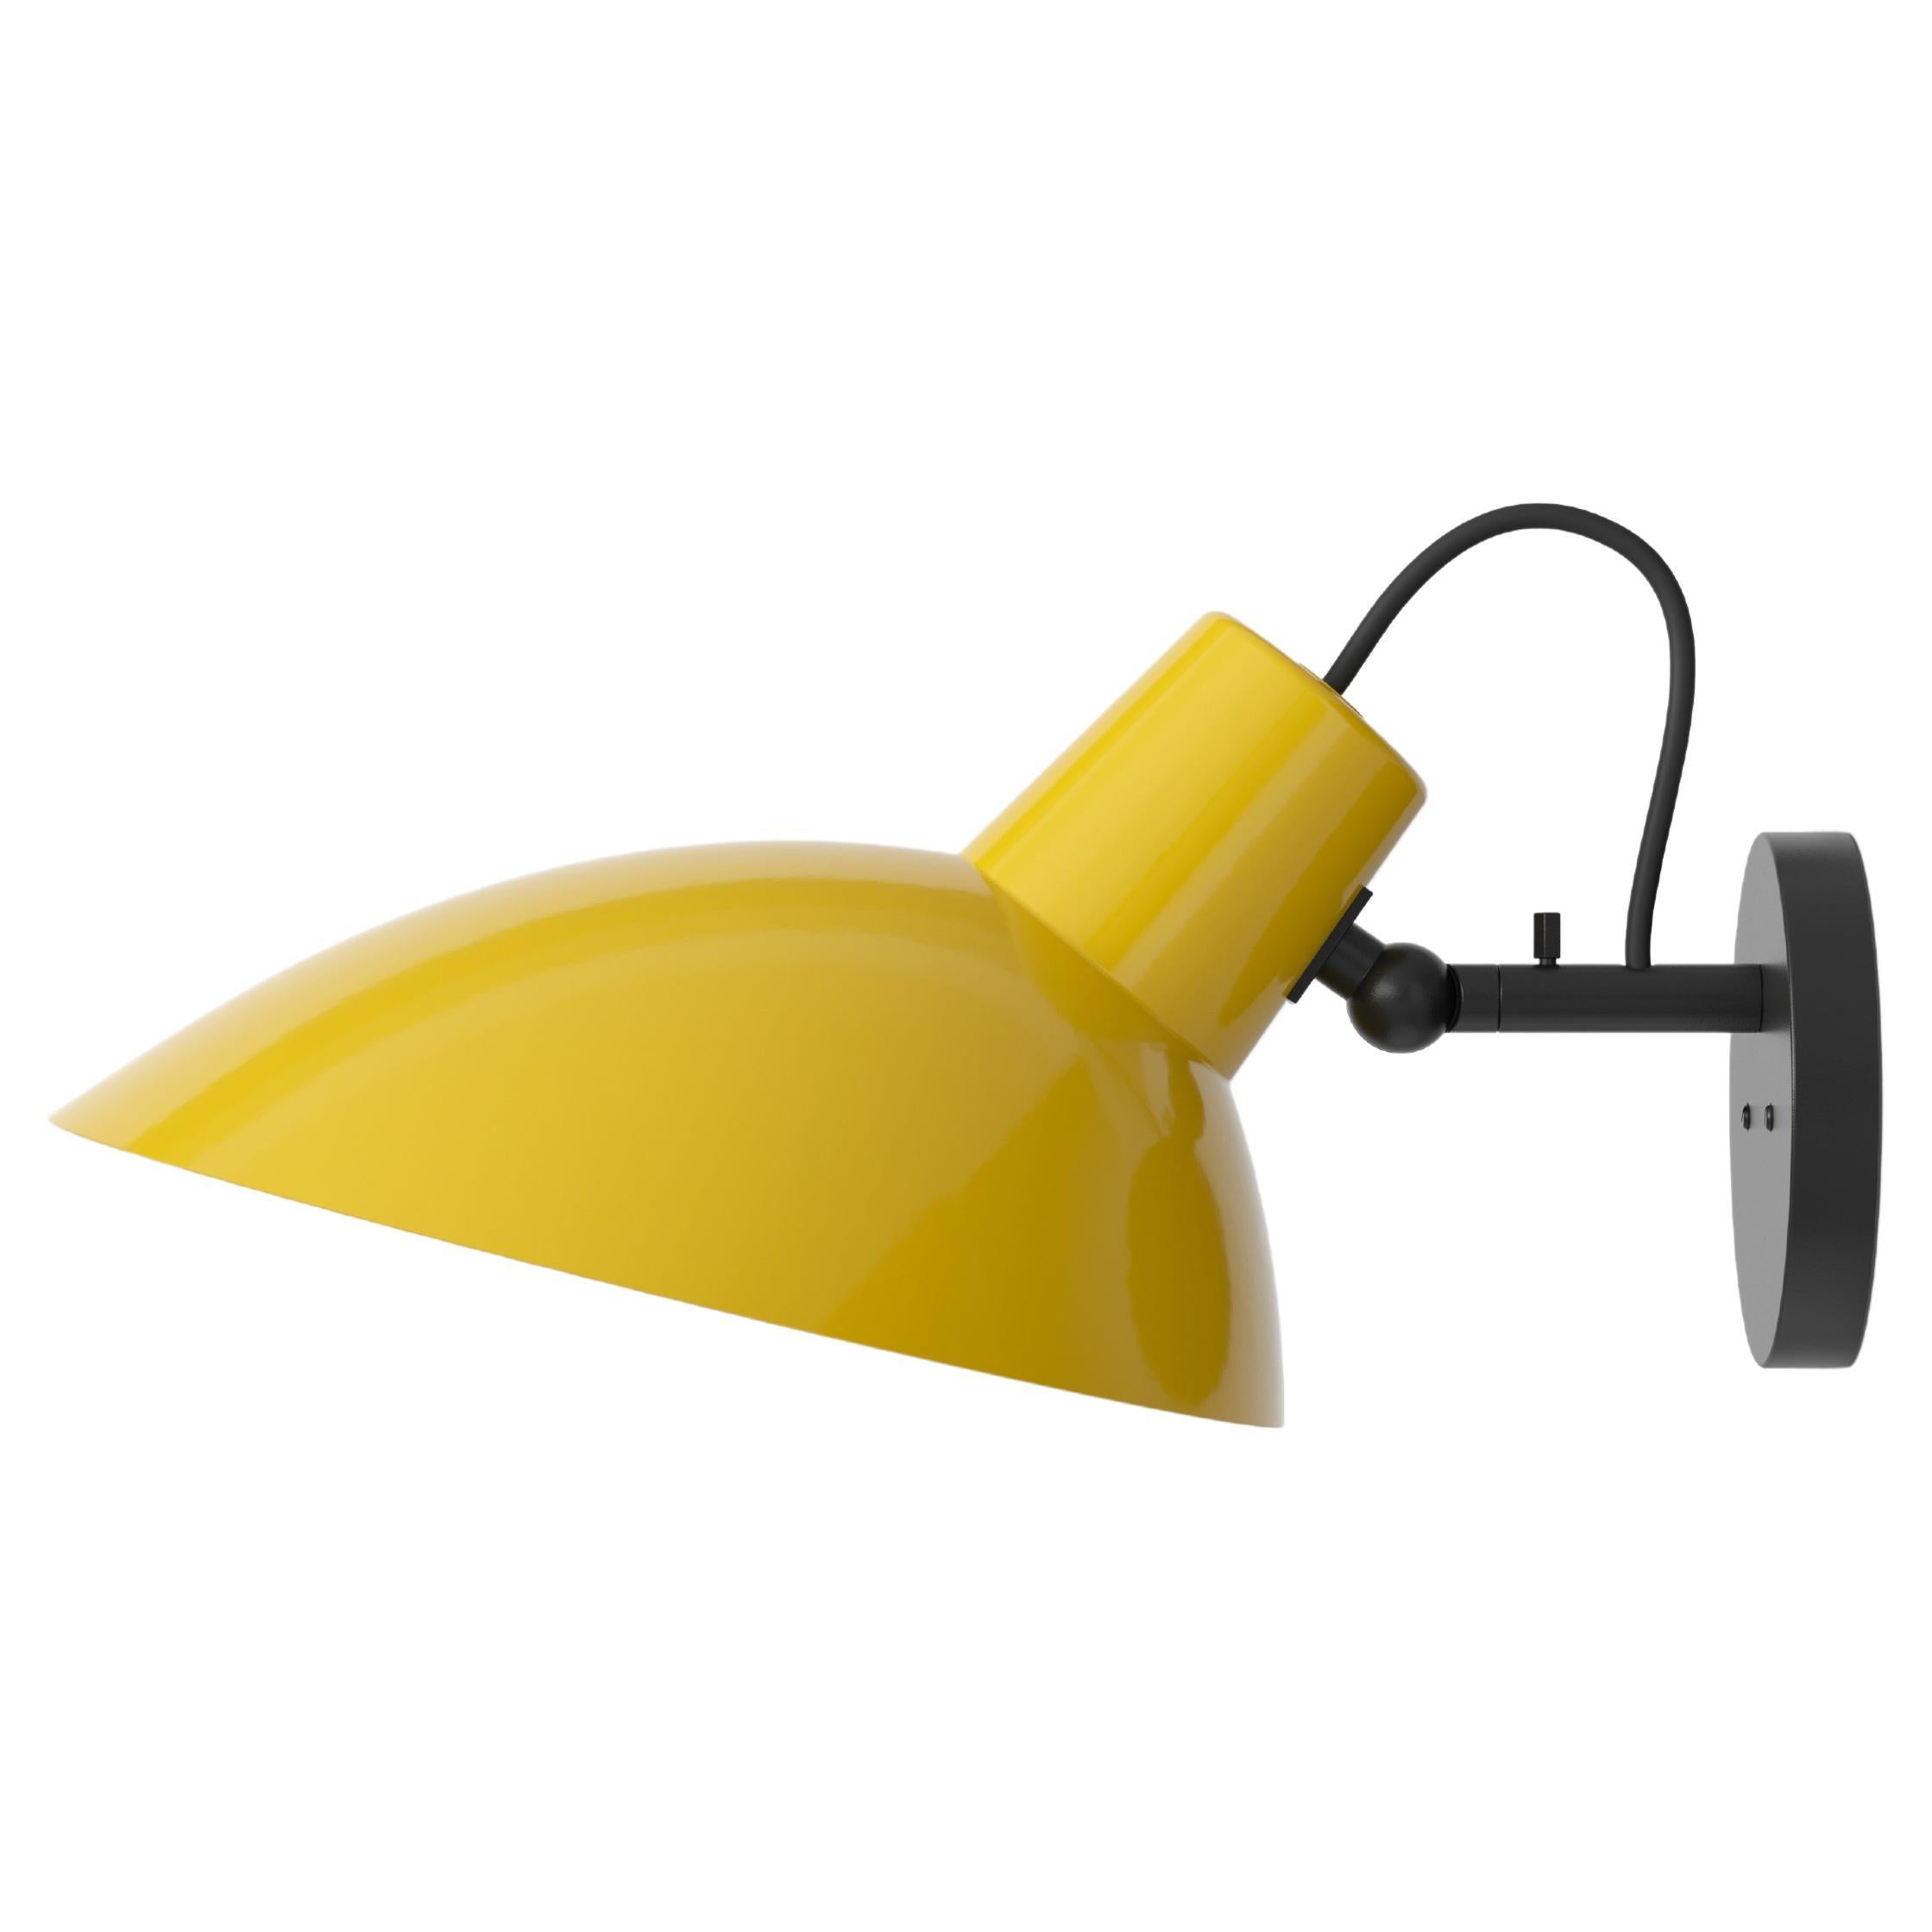 Pair of Vittoriano Viganò 'VV Cinquanta' sconces in yellow and black for Astep. Viganò was the art director of Arteluce, the company founded by his creative partner Gino Sarfatti, and the visor was one of his most celebrated designs. This is an